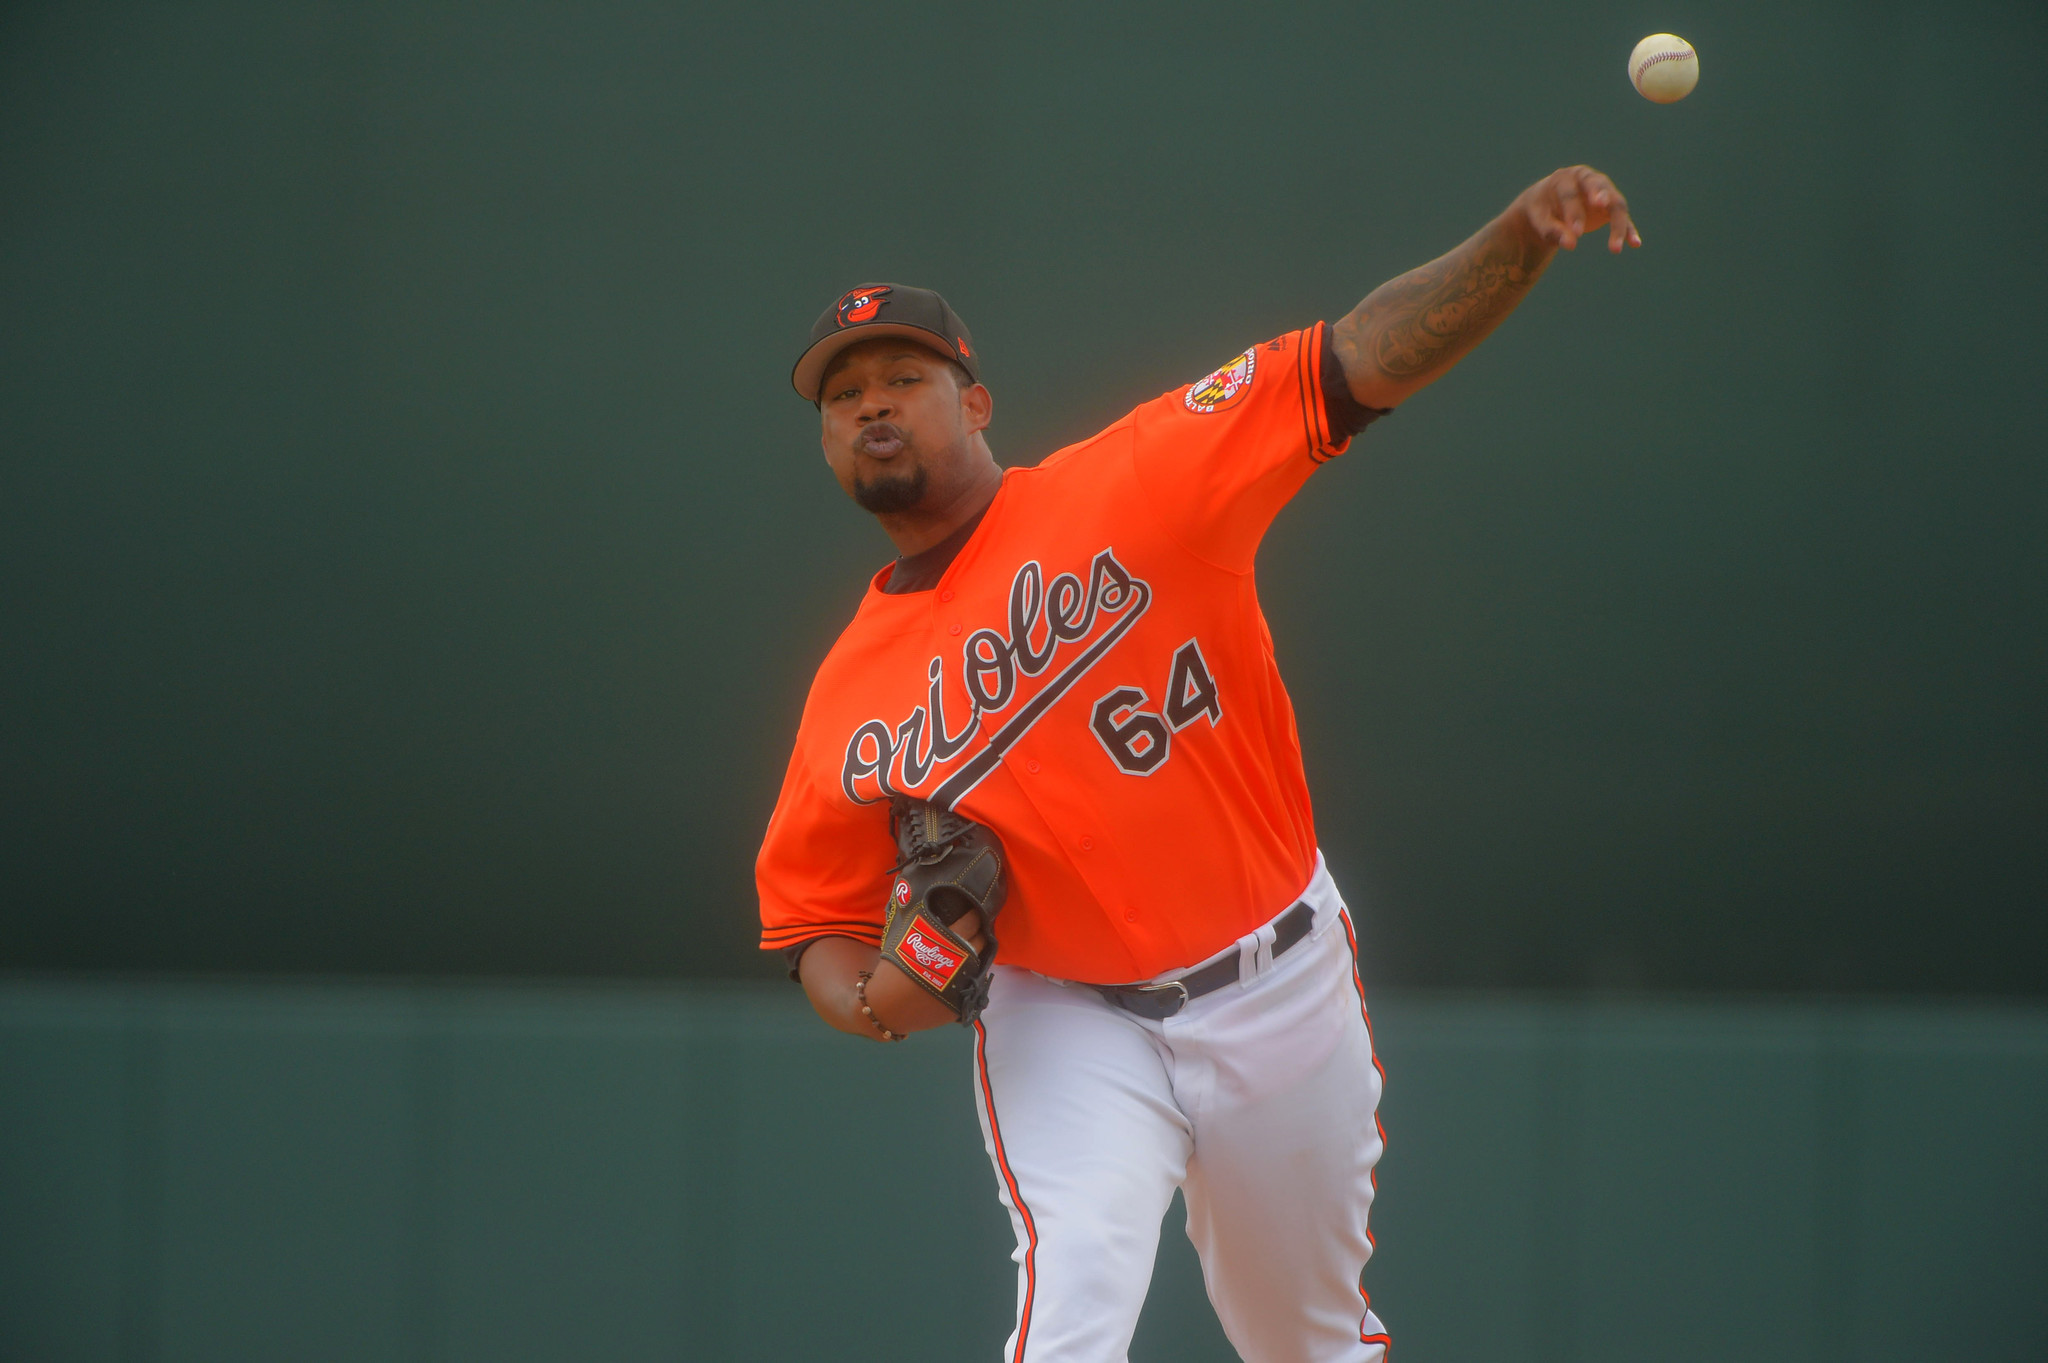 Orioles lefty Jayson Aquino looking to cap strong spring with first start Sunday